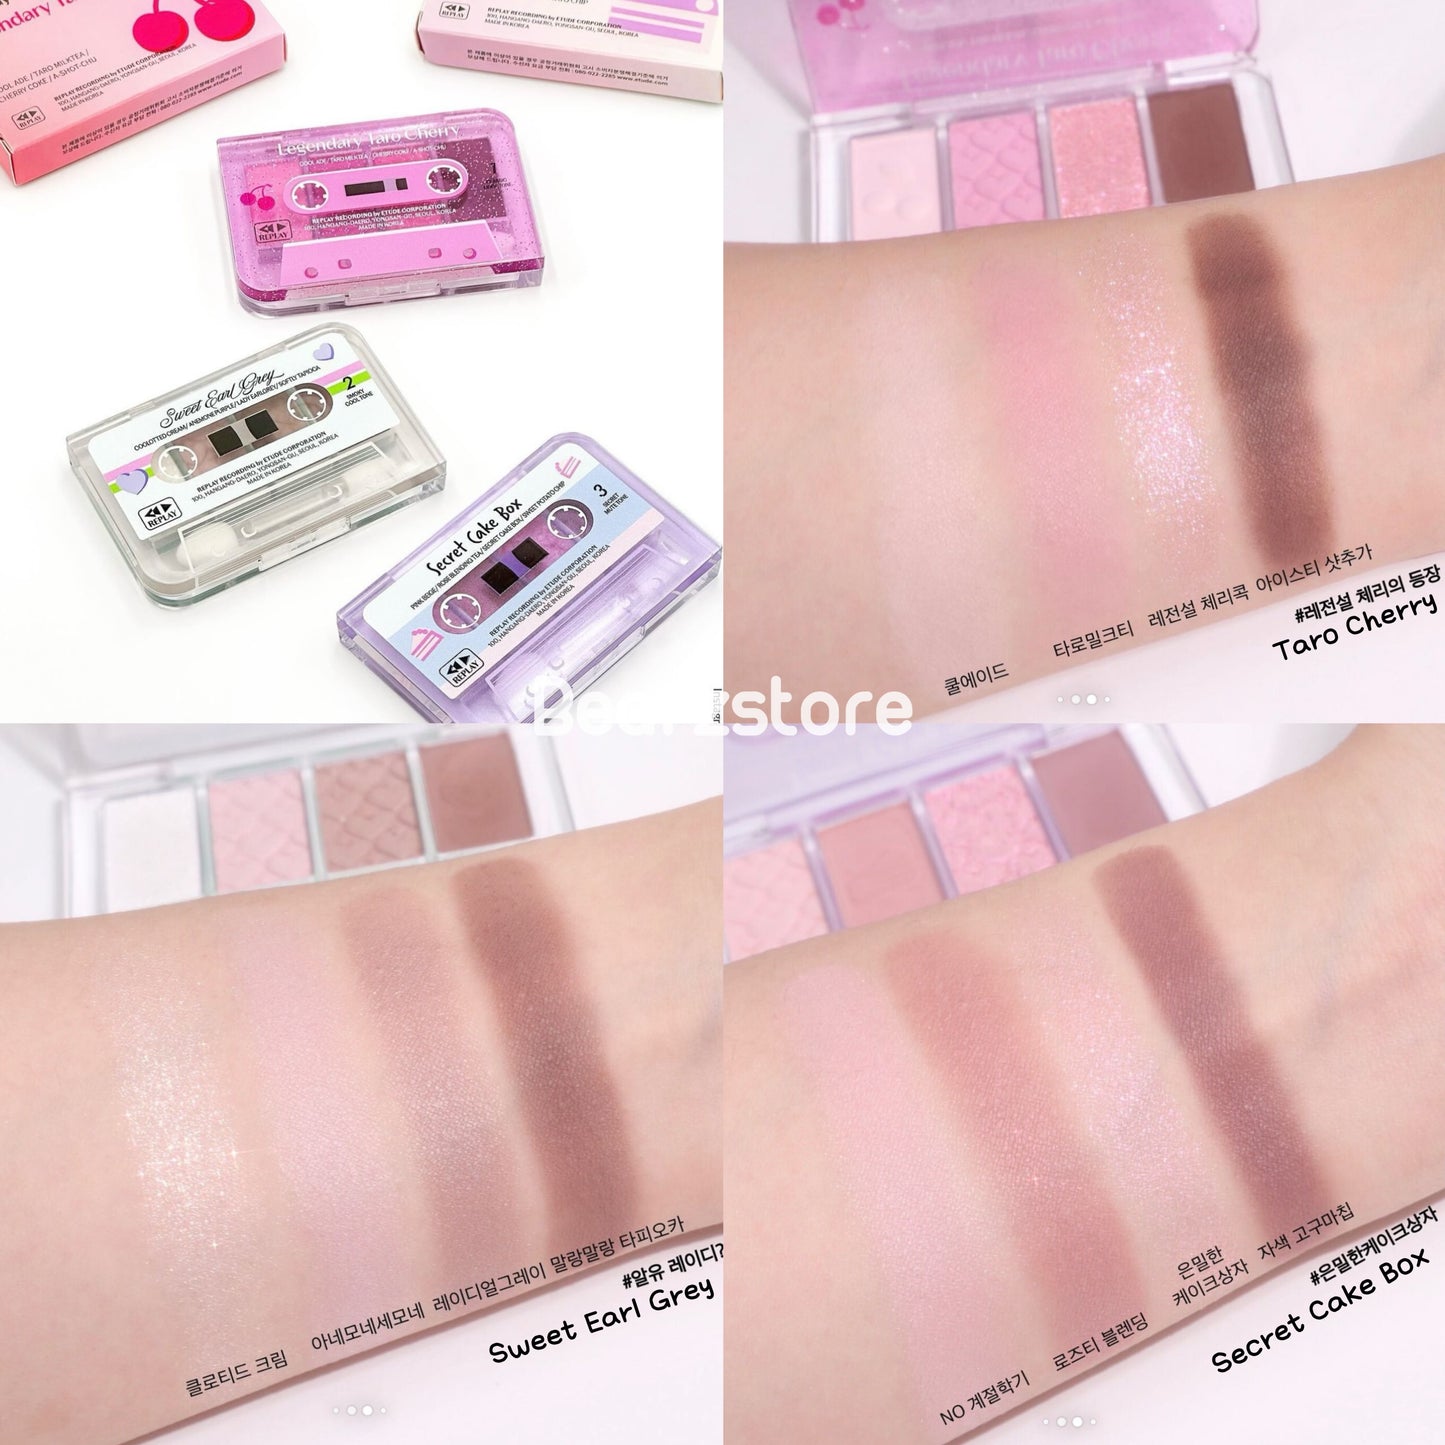 SHINee代言✨Etude 復古創意錄音帶眼影盤📻 | Etude Play Color Eyes Shadow Palette Replay Collection⭐️